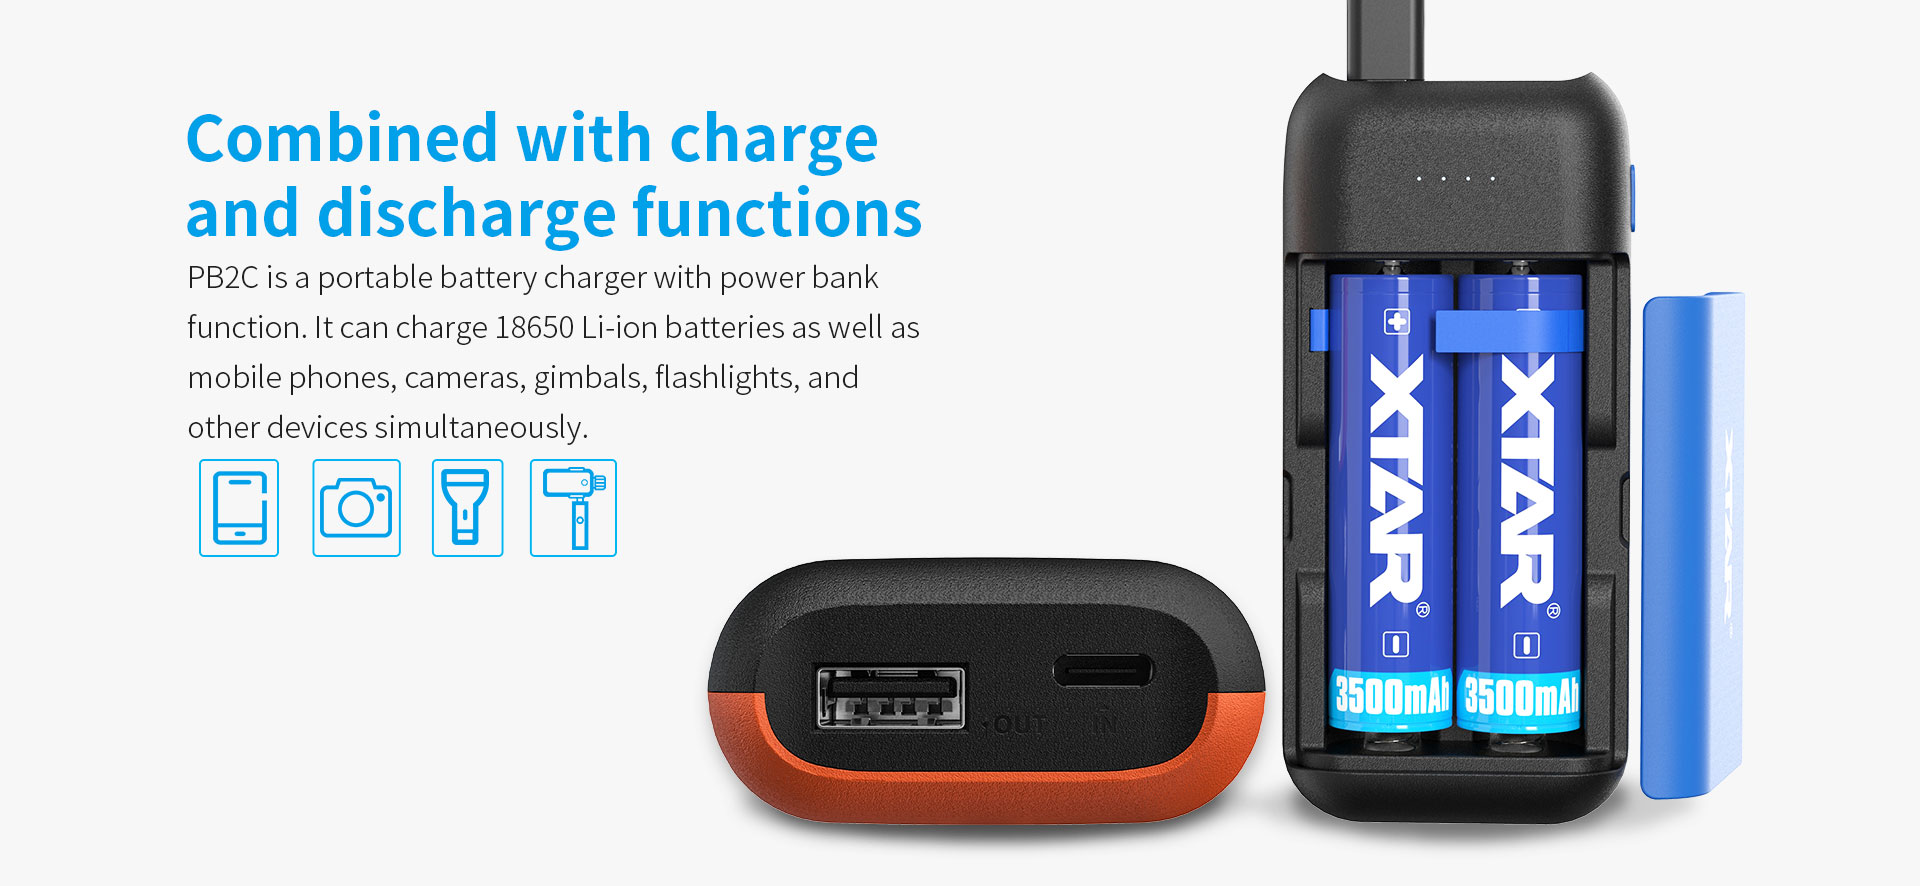 PB2C is a portable battery charger with power bank function.